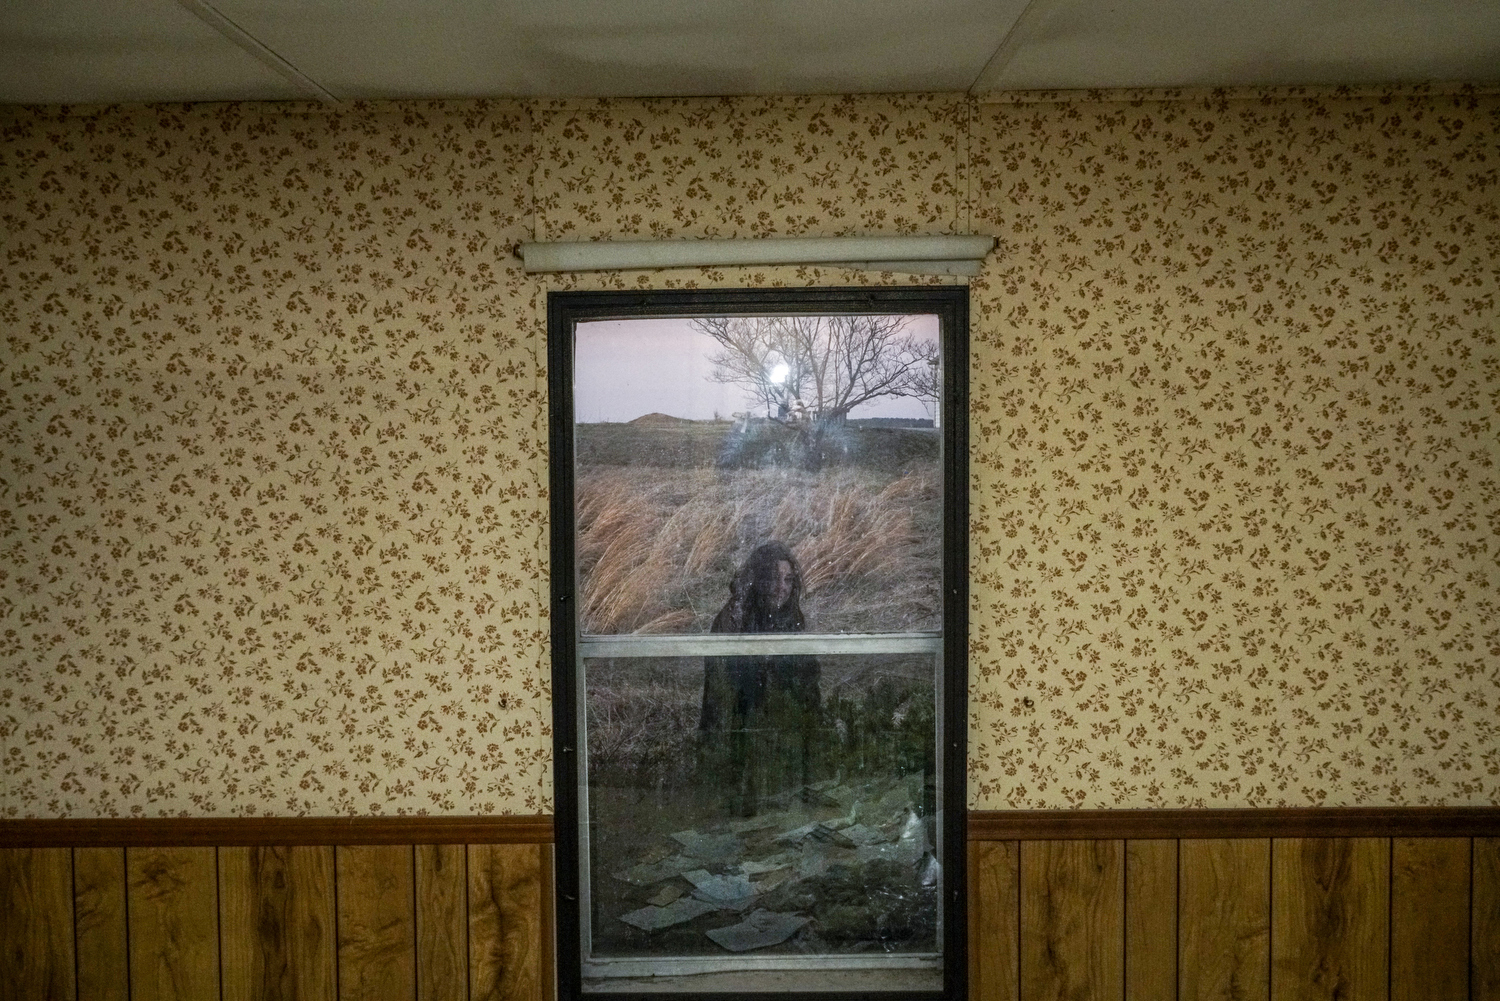 2017. Illinois. USA.  Georgia de la Garza, a local environmental access in Southern Illinois.  She is pictured from inside an abandoned house near the Eagle River Coal Mines-Franks LLC in Harrisburg, Illinois.  Mining jobs have been the core of the economy in Southern Illinois for the past century, a source of stability, prosperity and pride. In the last few decades the number of jobs have declined to a small fraction of their former number, leaving the economy in shambles with few prospects for new forms of industry to take its place.